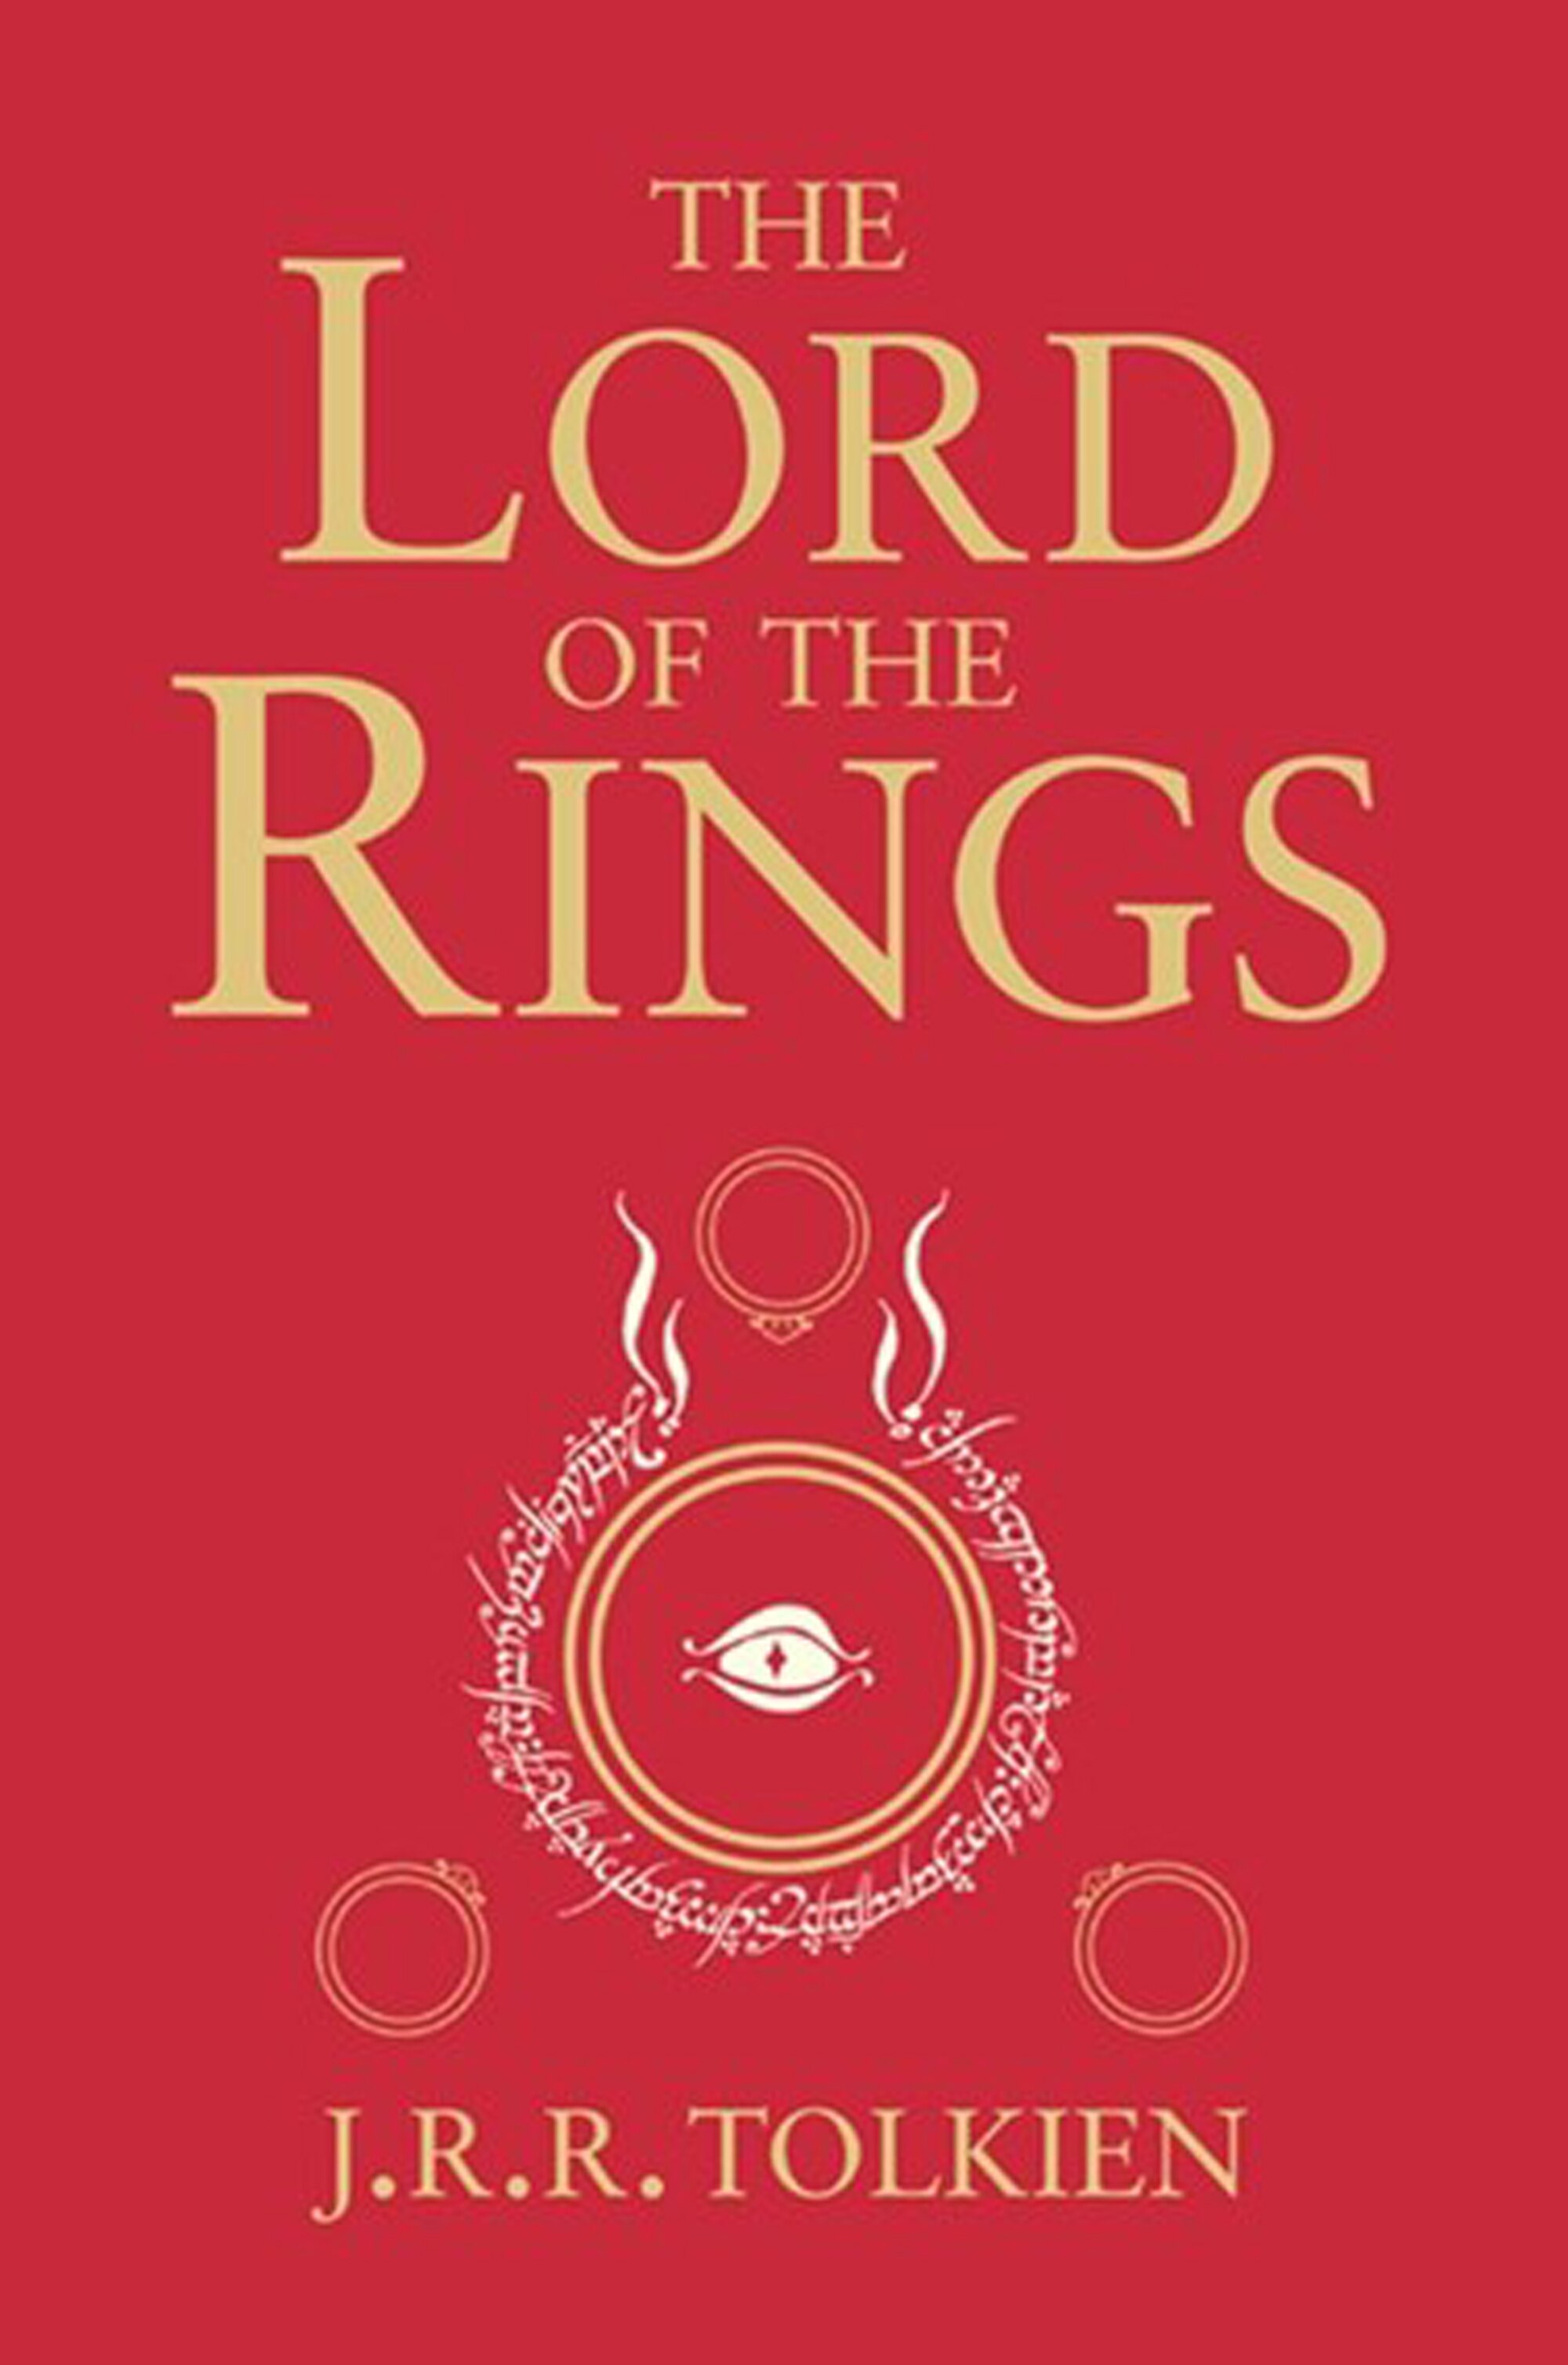 Cover of Lord of the Rings by J.R.R Tolkien